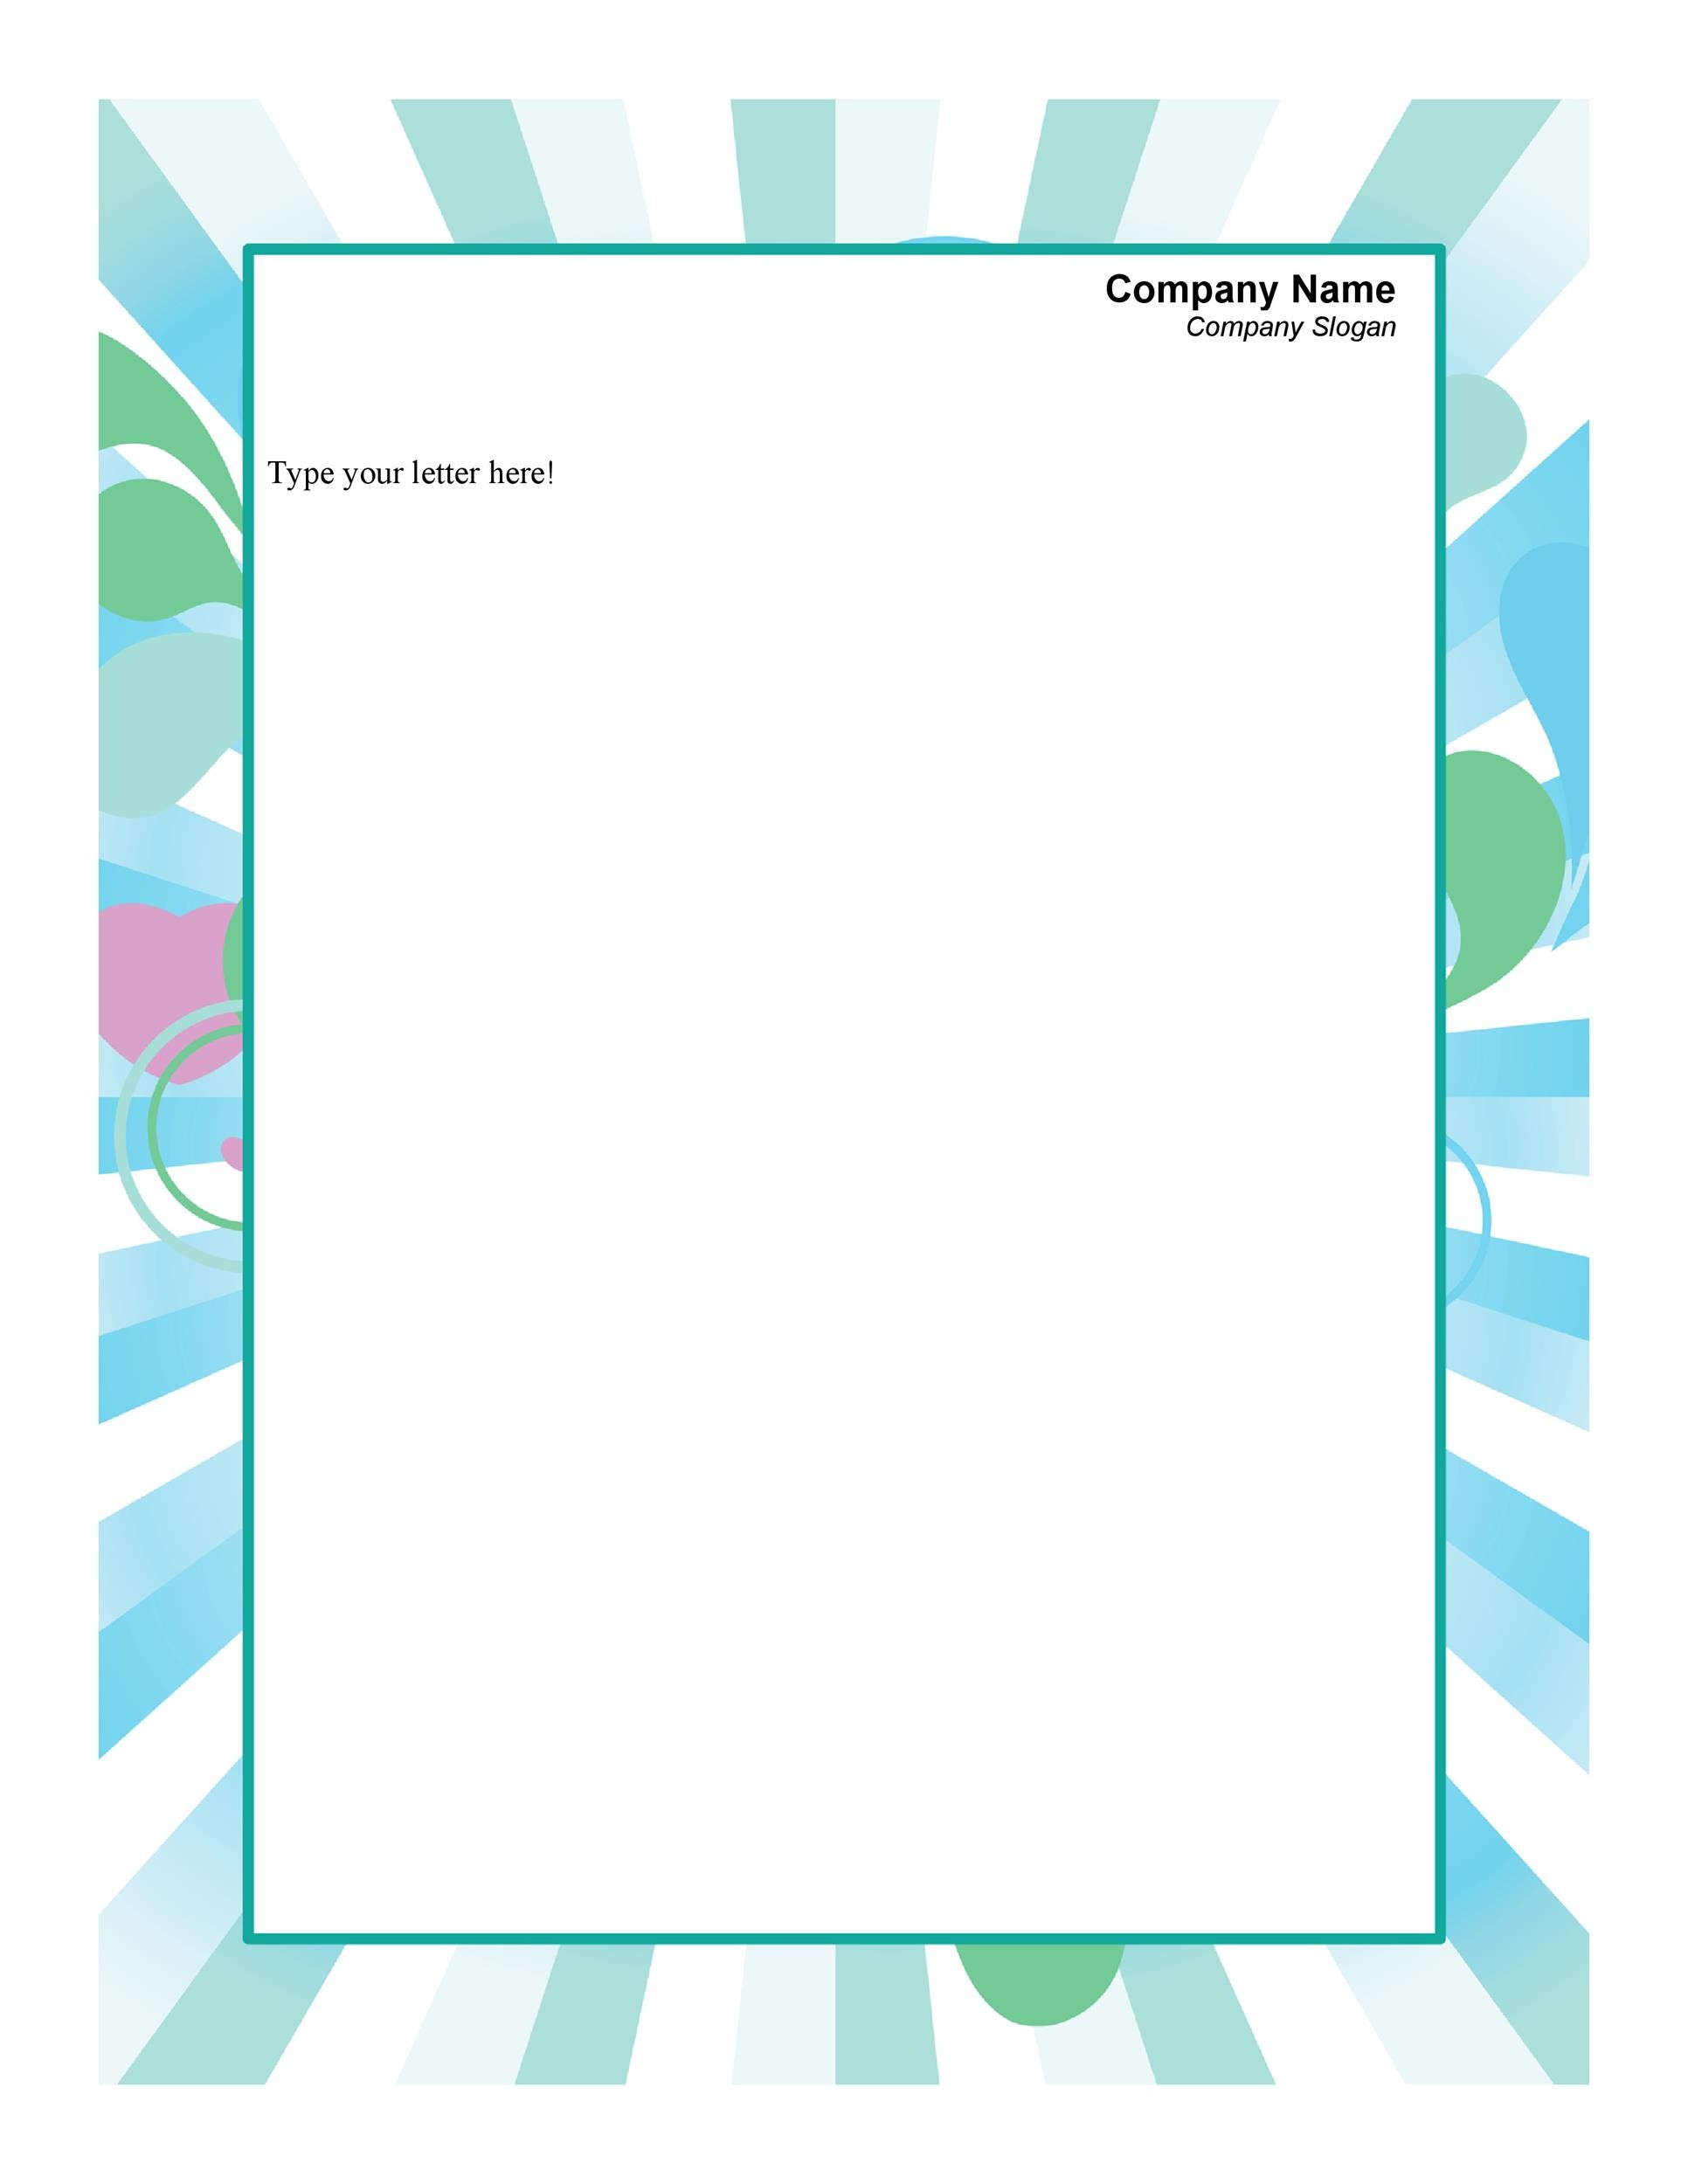 Free Letterhead Templates Examples Company Business Personal 88200 